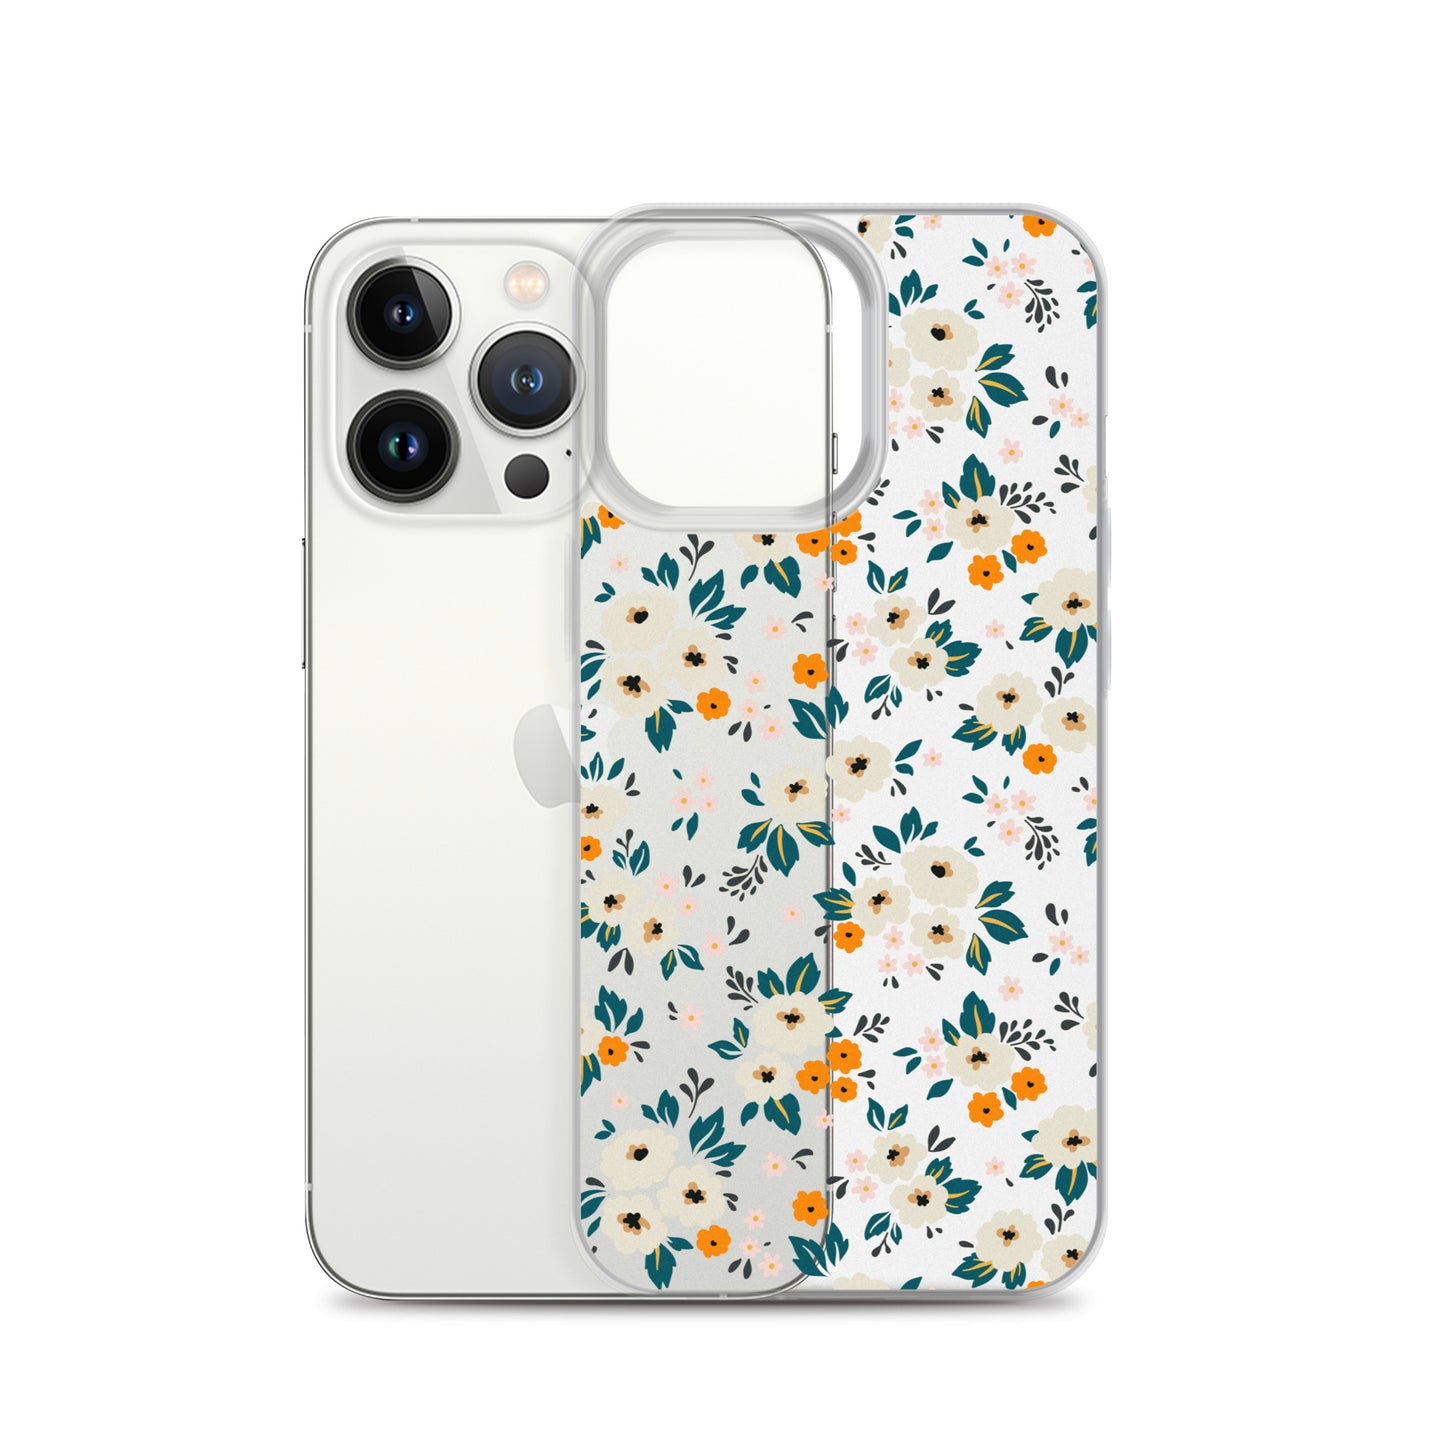 Small Flower Pattern Clear iPhone 13 12 Pro Max Case, Floral Print Cute Gift Aesthetic iPhone 11 Mini SE 2020 XS Max XR X 8 7 Plus Transparent Starcove Fashion